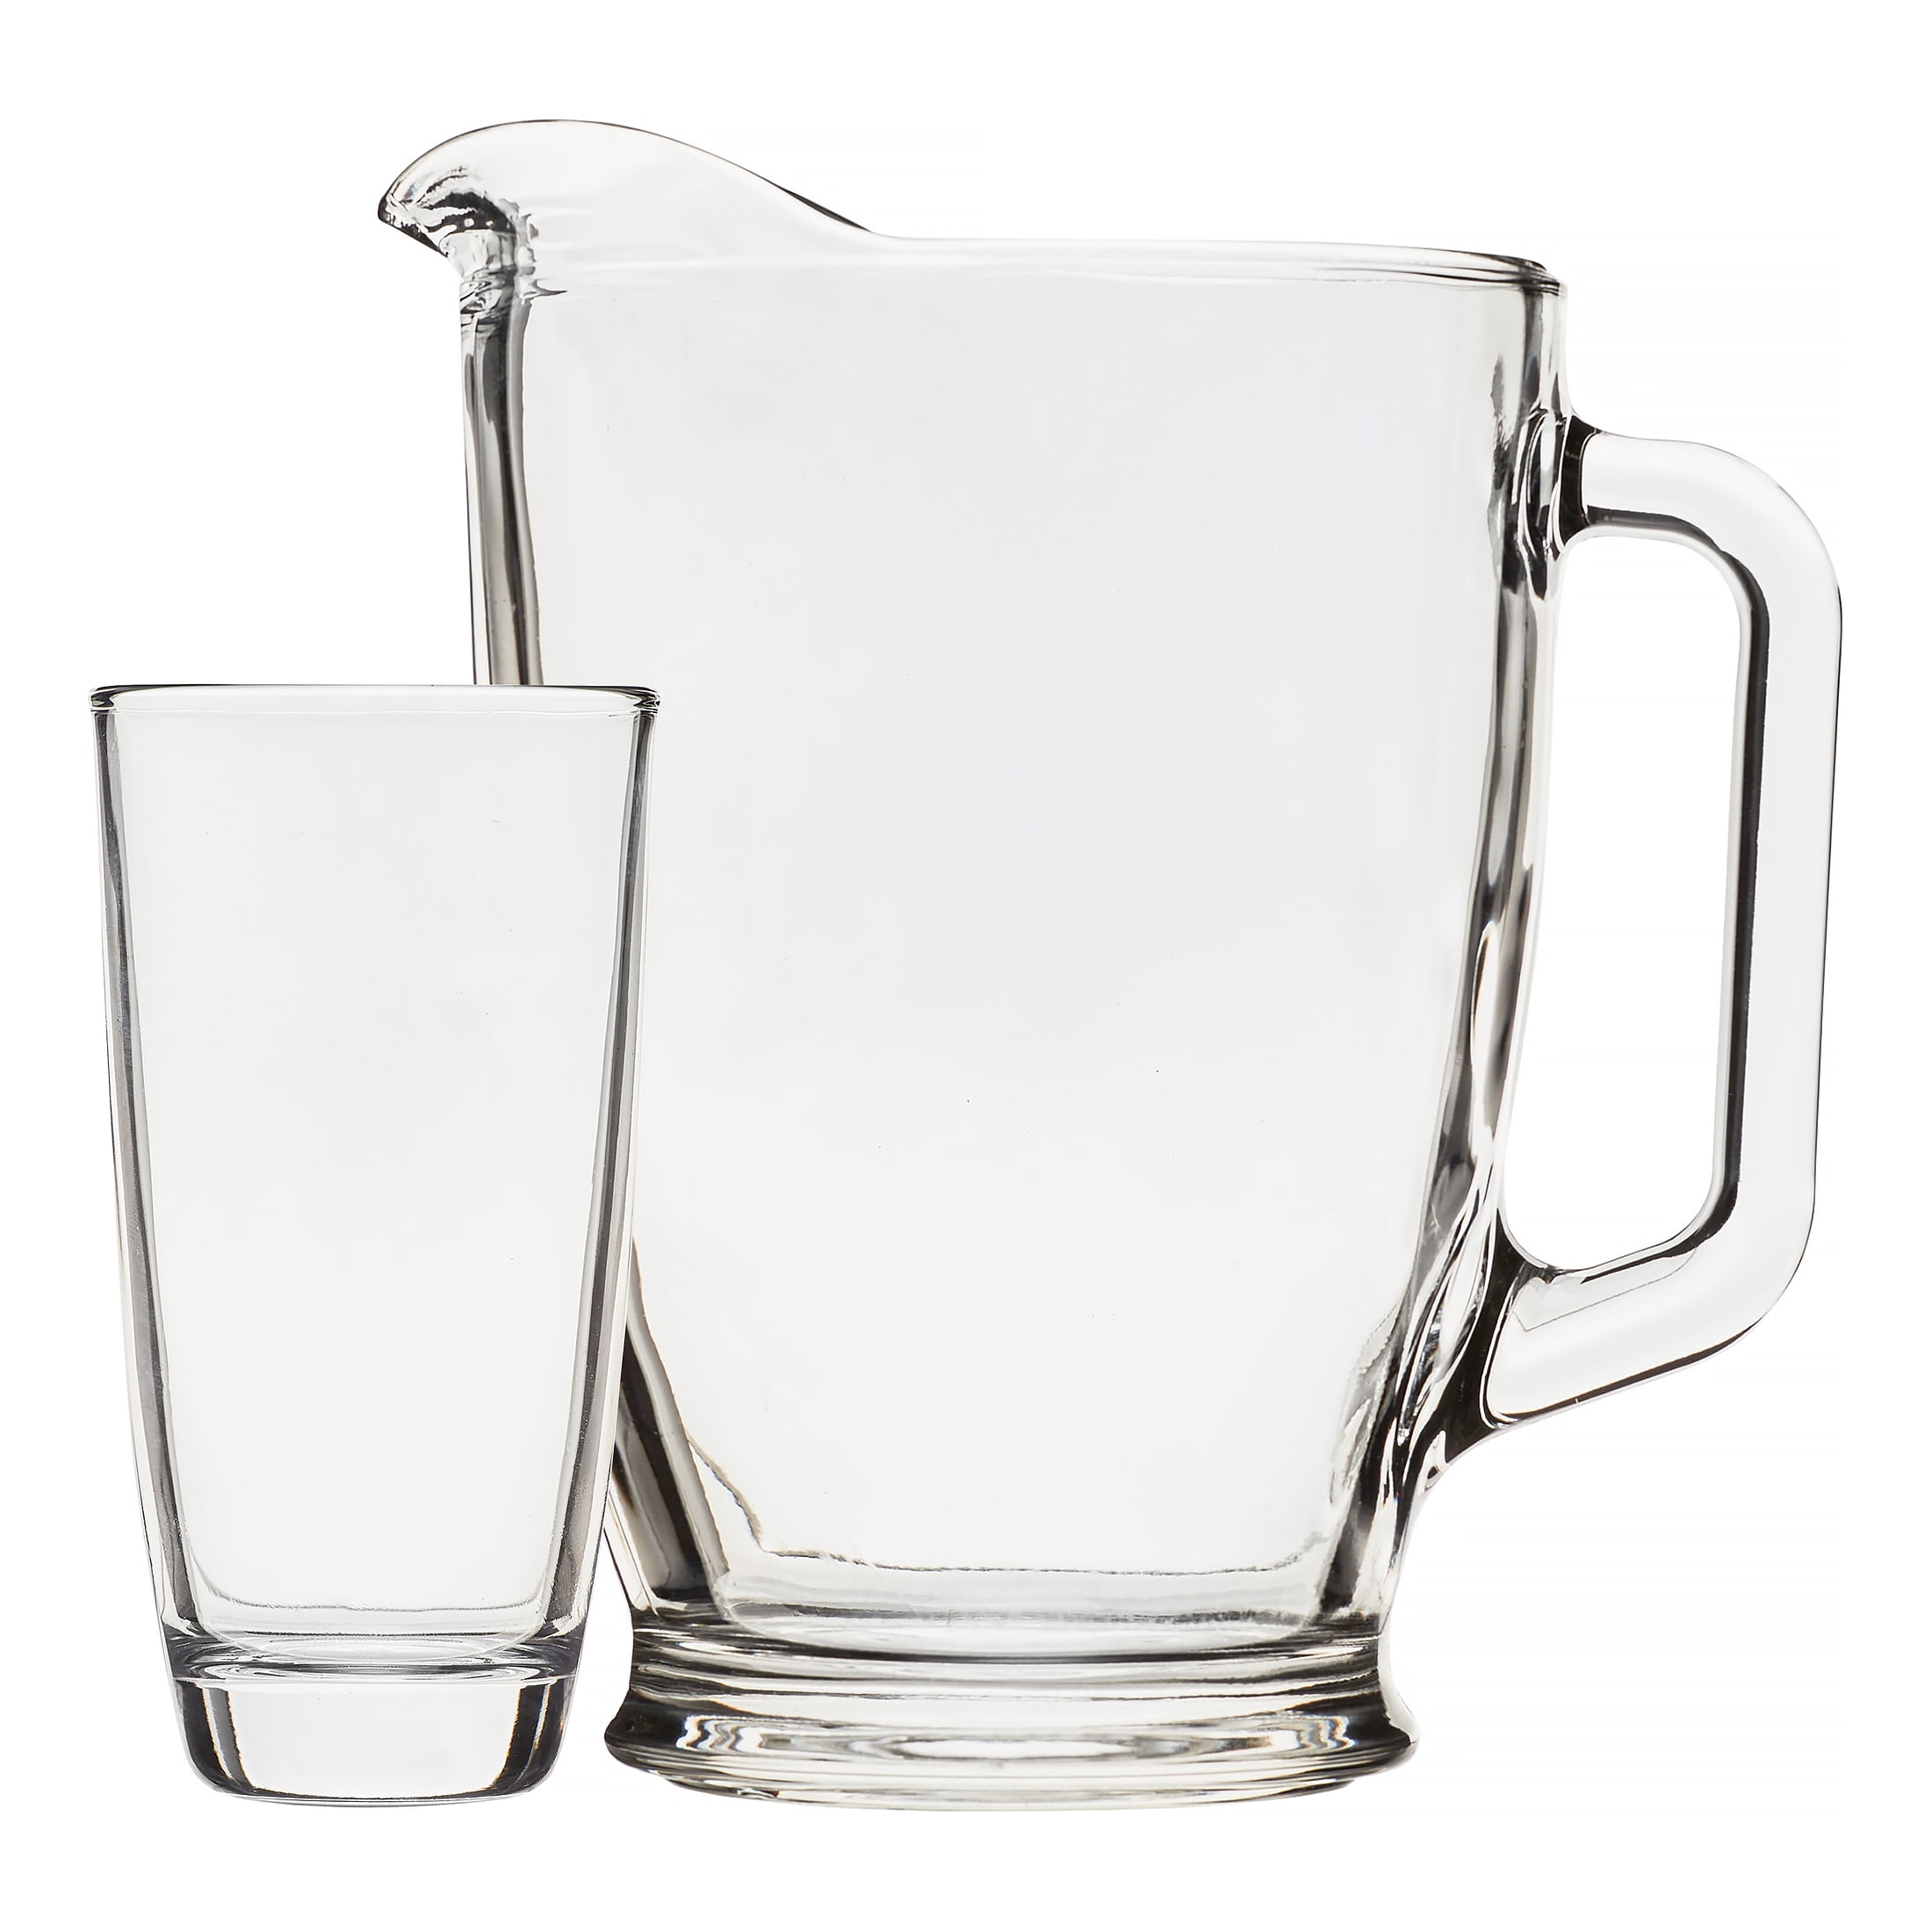 Drinkware + Glassware  Mugs, Cups, Cocktail Glasses, Pitchers +